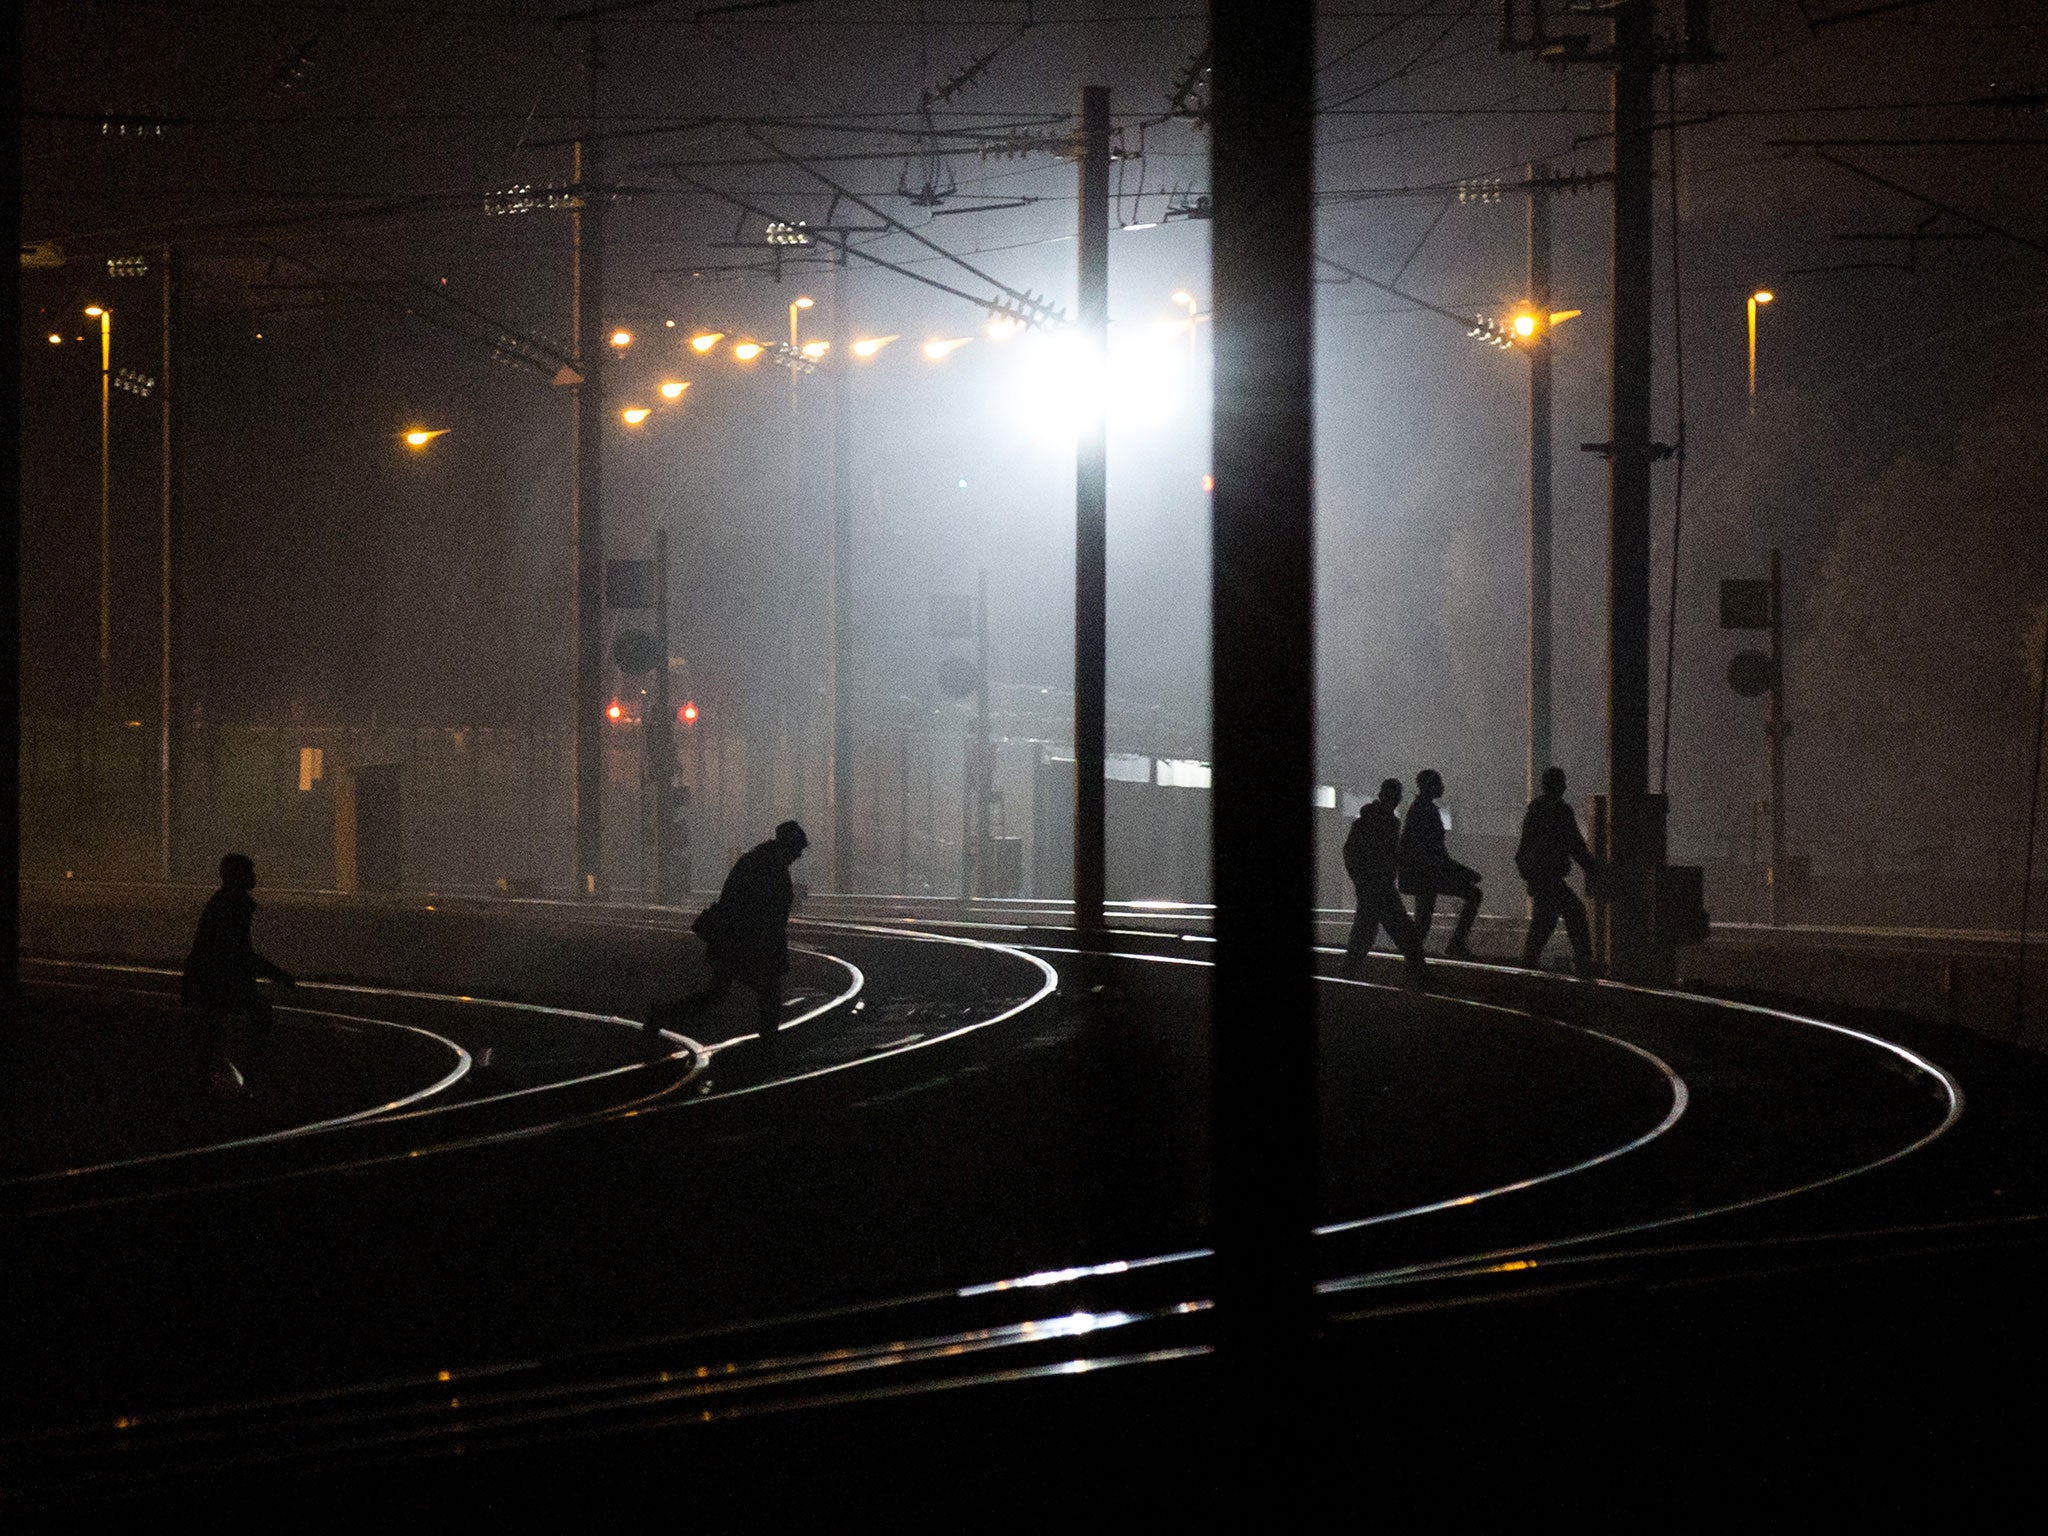 People walk across train tracks near the Eurotunnel terminal in Coquelles on August 3, 2015 in Calais, France